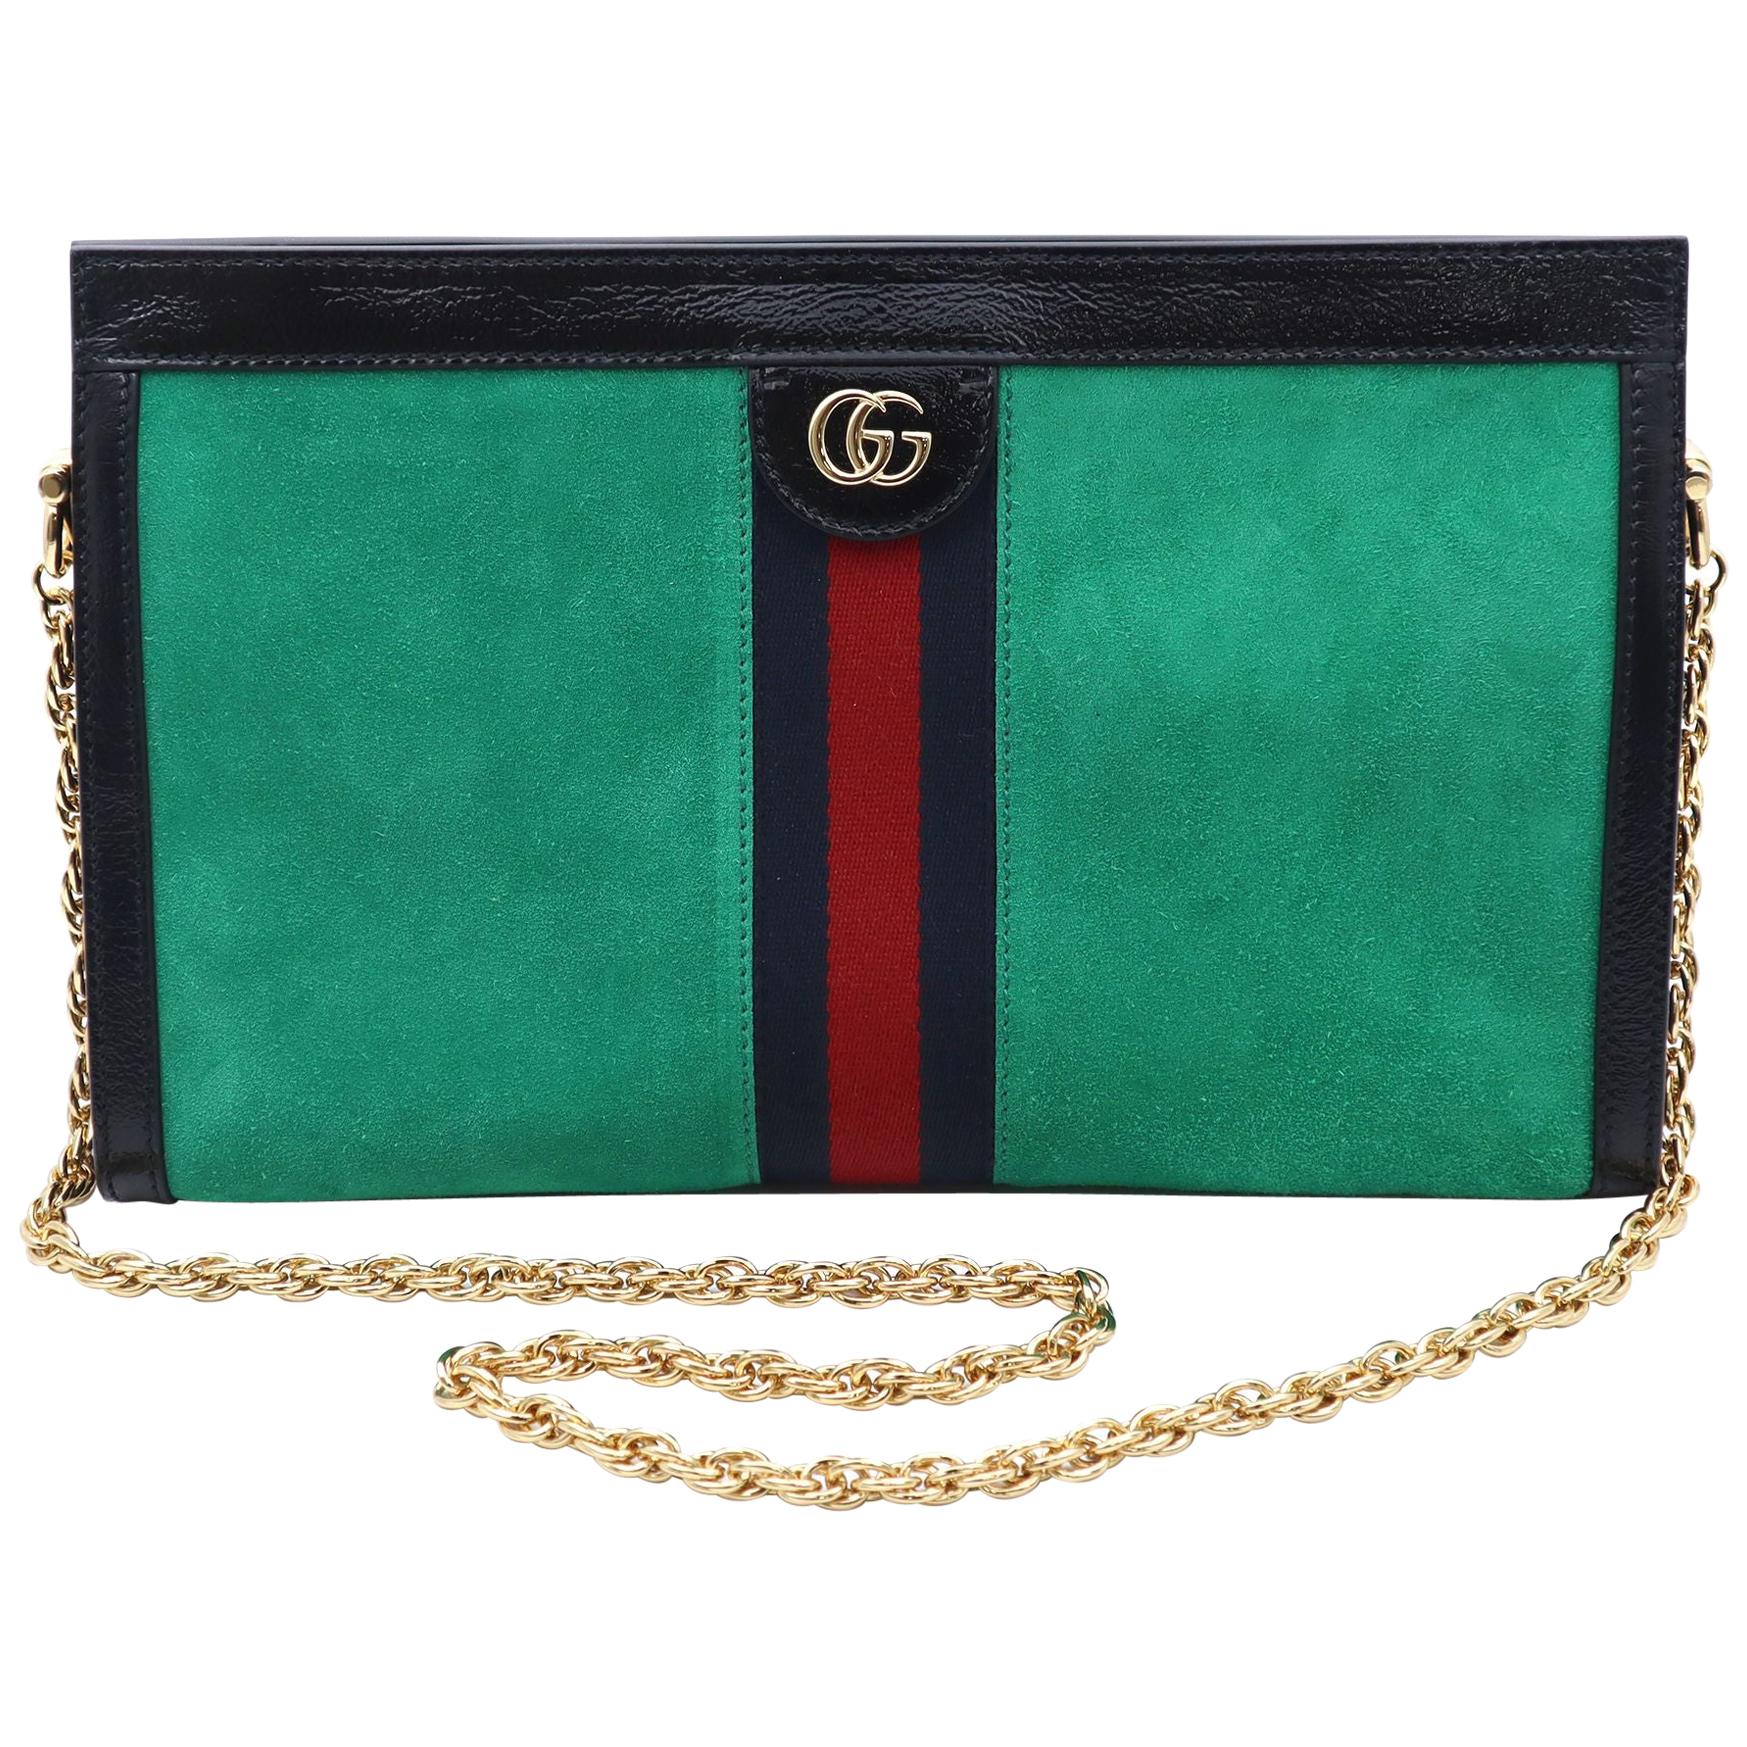 Gucci Ophidia Chain Green Suede Shoulder Bag Size Medium 503876 